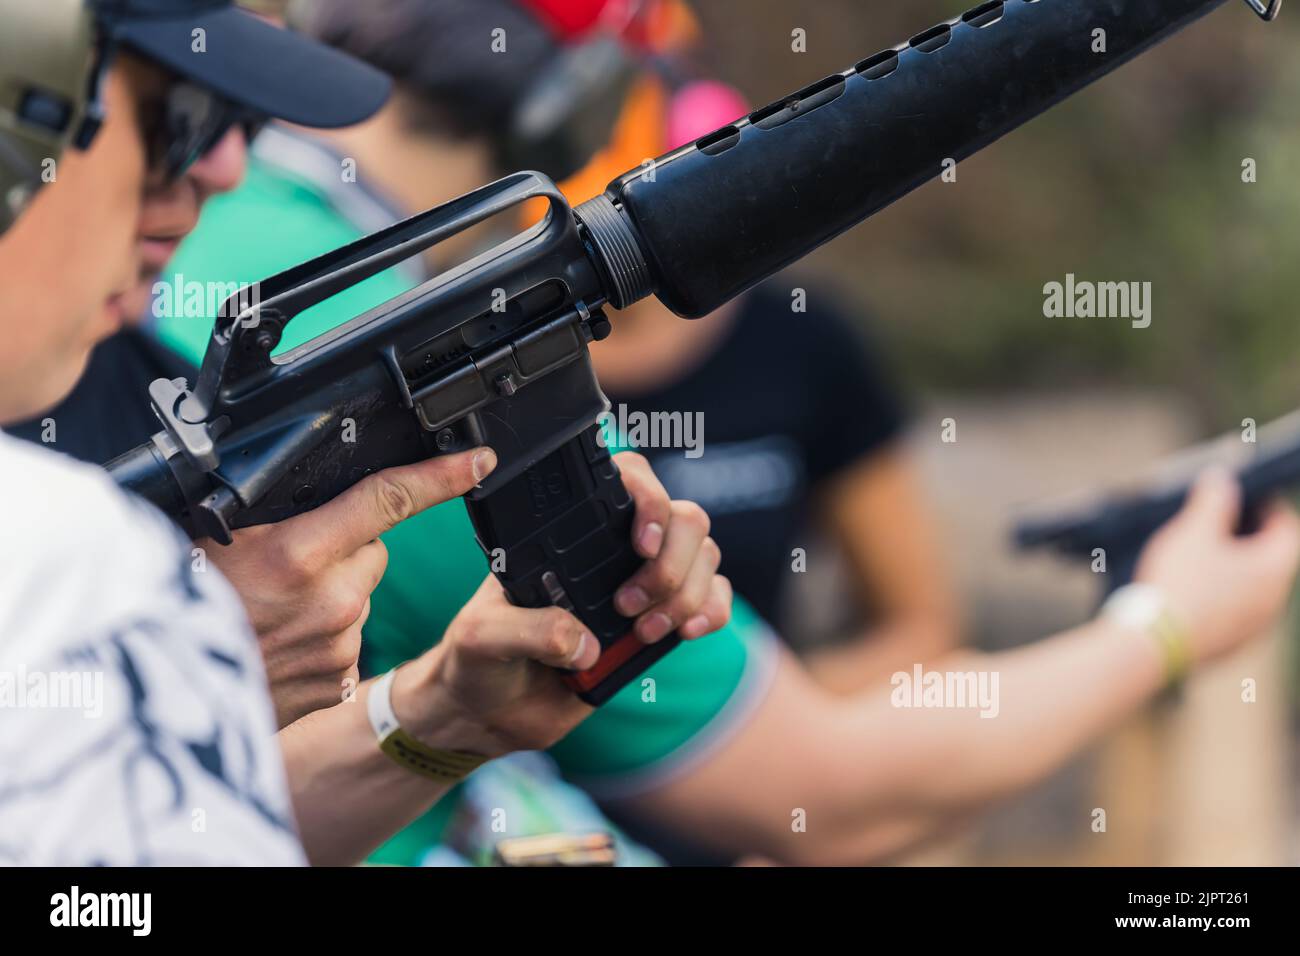 2022.08.07 Modlin, Poland - Group of people training how to operate guns. Firearm training at firing range. Safety gear. Close-up of submachine gun. Outdoor horizontal shot . High quality photo Stock Photo